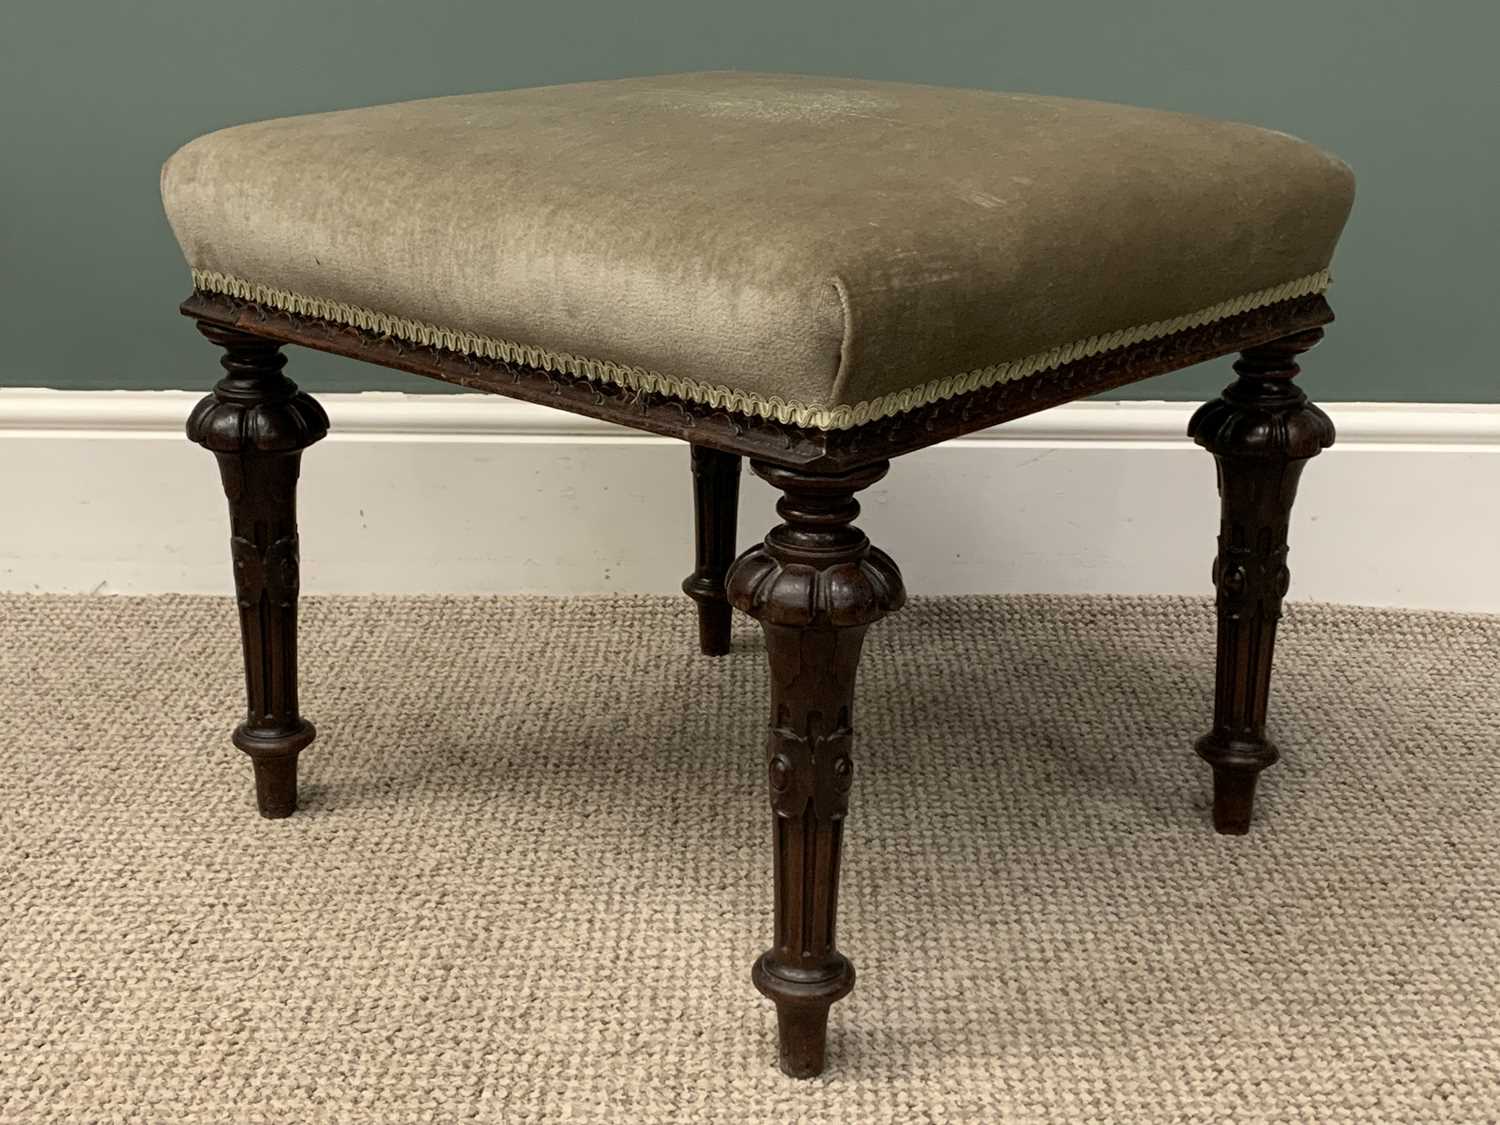 THREE VINTAGE UPHOLSTERED FOOT & OTHER STOOLS / INLAID MAHOGANY BEDROOM CHAIR Provenance: Private - Image 3 of 5